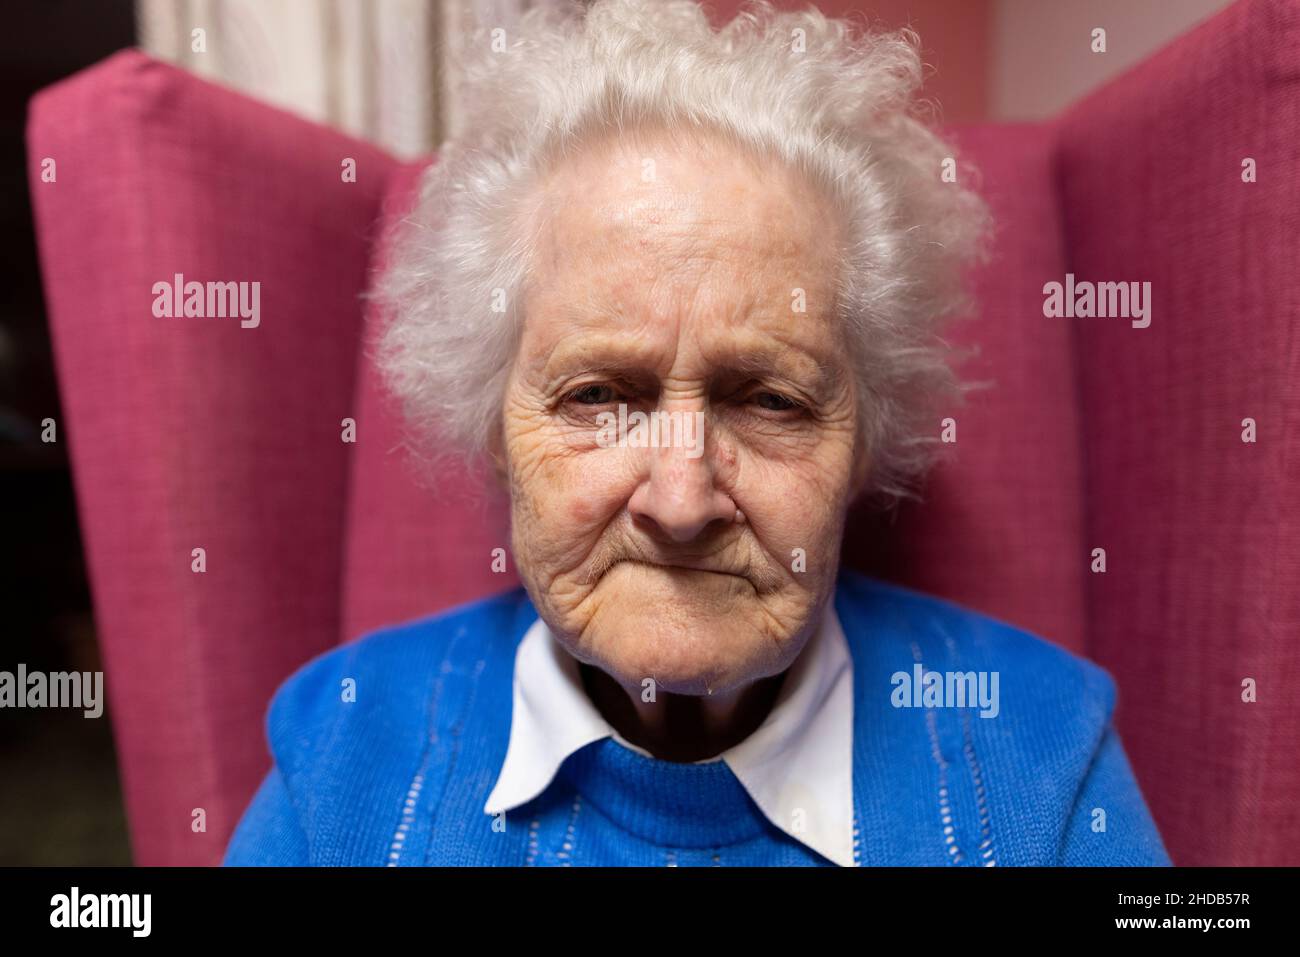 Elderly couple in their eighties sitting together at their residential care home, England, United Kingdom Stock Photo